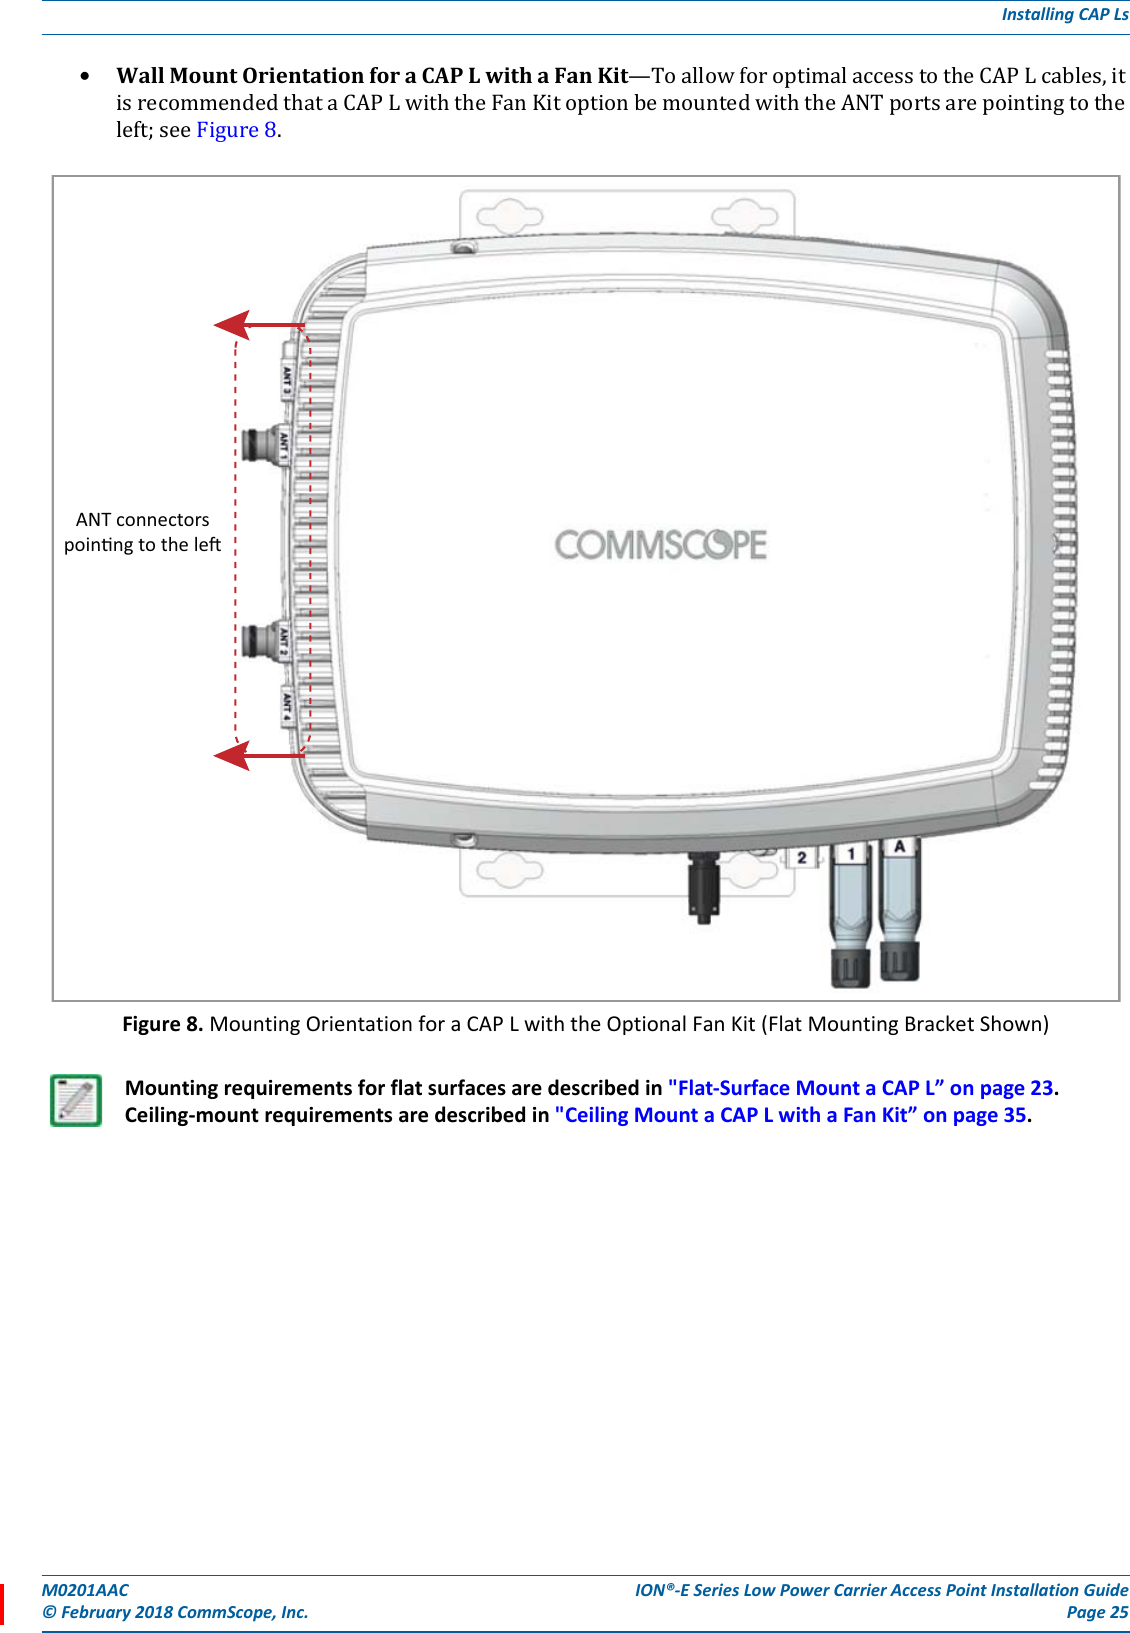 M0201AAC ION®-E Series Low Power Carrier Access Point Installation Guide© February 2018 CommScope, Inc. Page 25Installing CAP Ls•WallMountOrientationforaCAPLwithaFanKit—ToallowforoptimalaccesstotheCAPLcables,itisrecommendedthataCAPLwiththeFanKitoptionbemountedwiththeANTportsarepointingtotheleft;seeFigure8.Figure 8. Mounting Orientation for a CAP L with the Optional Fan Kit (Flat Mounting Bracket Shown)Mounting requirements for flat surfaces are described in &quot;Flat-Surface Mount a CAP L” on page 23. Ceiling-mount requirements are described in &quot;Ceiling Mount a CAP L with a Fan Kit” on page 35.ANT connectorspoinng to the le